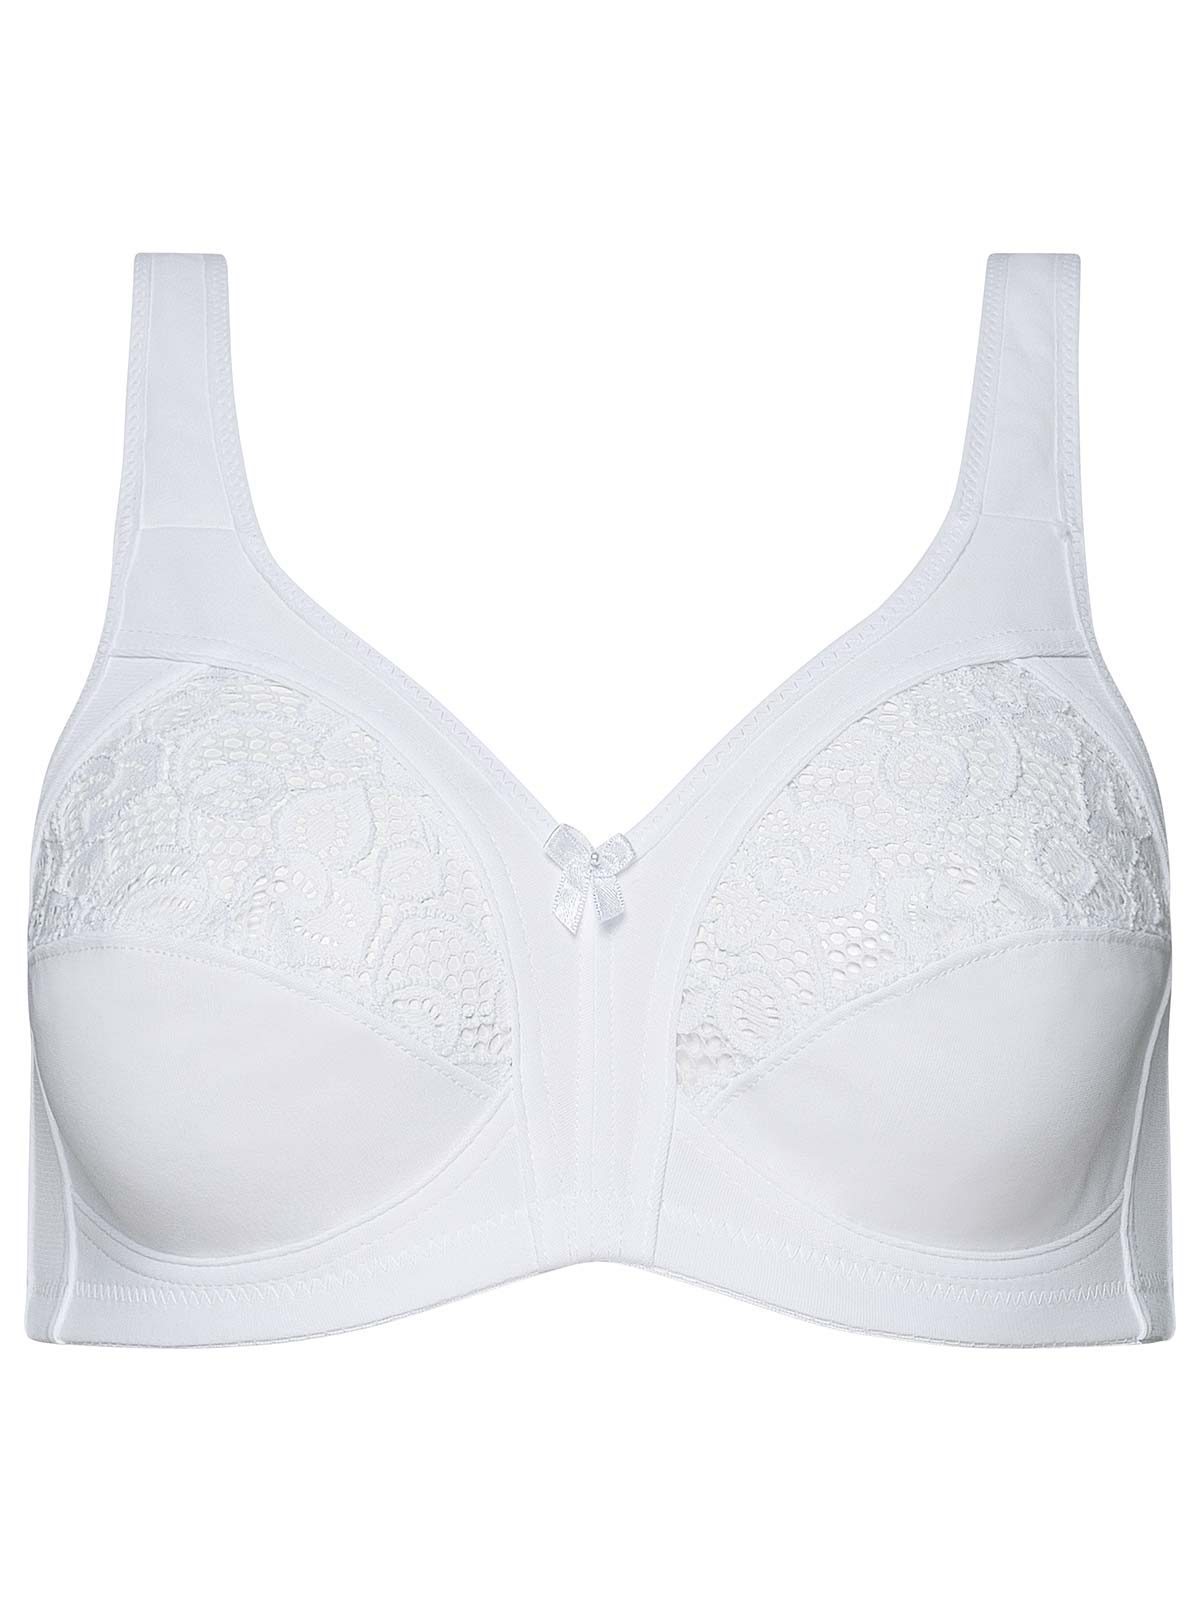 Naturana 5046 Soft Cup Non-Wired Bra - Bras - Barsleys Department Store